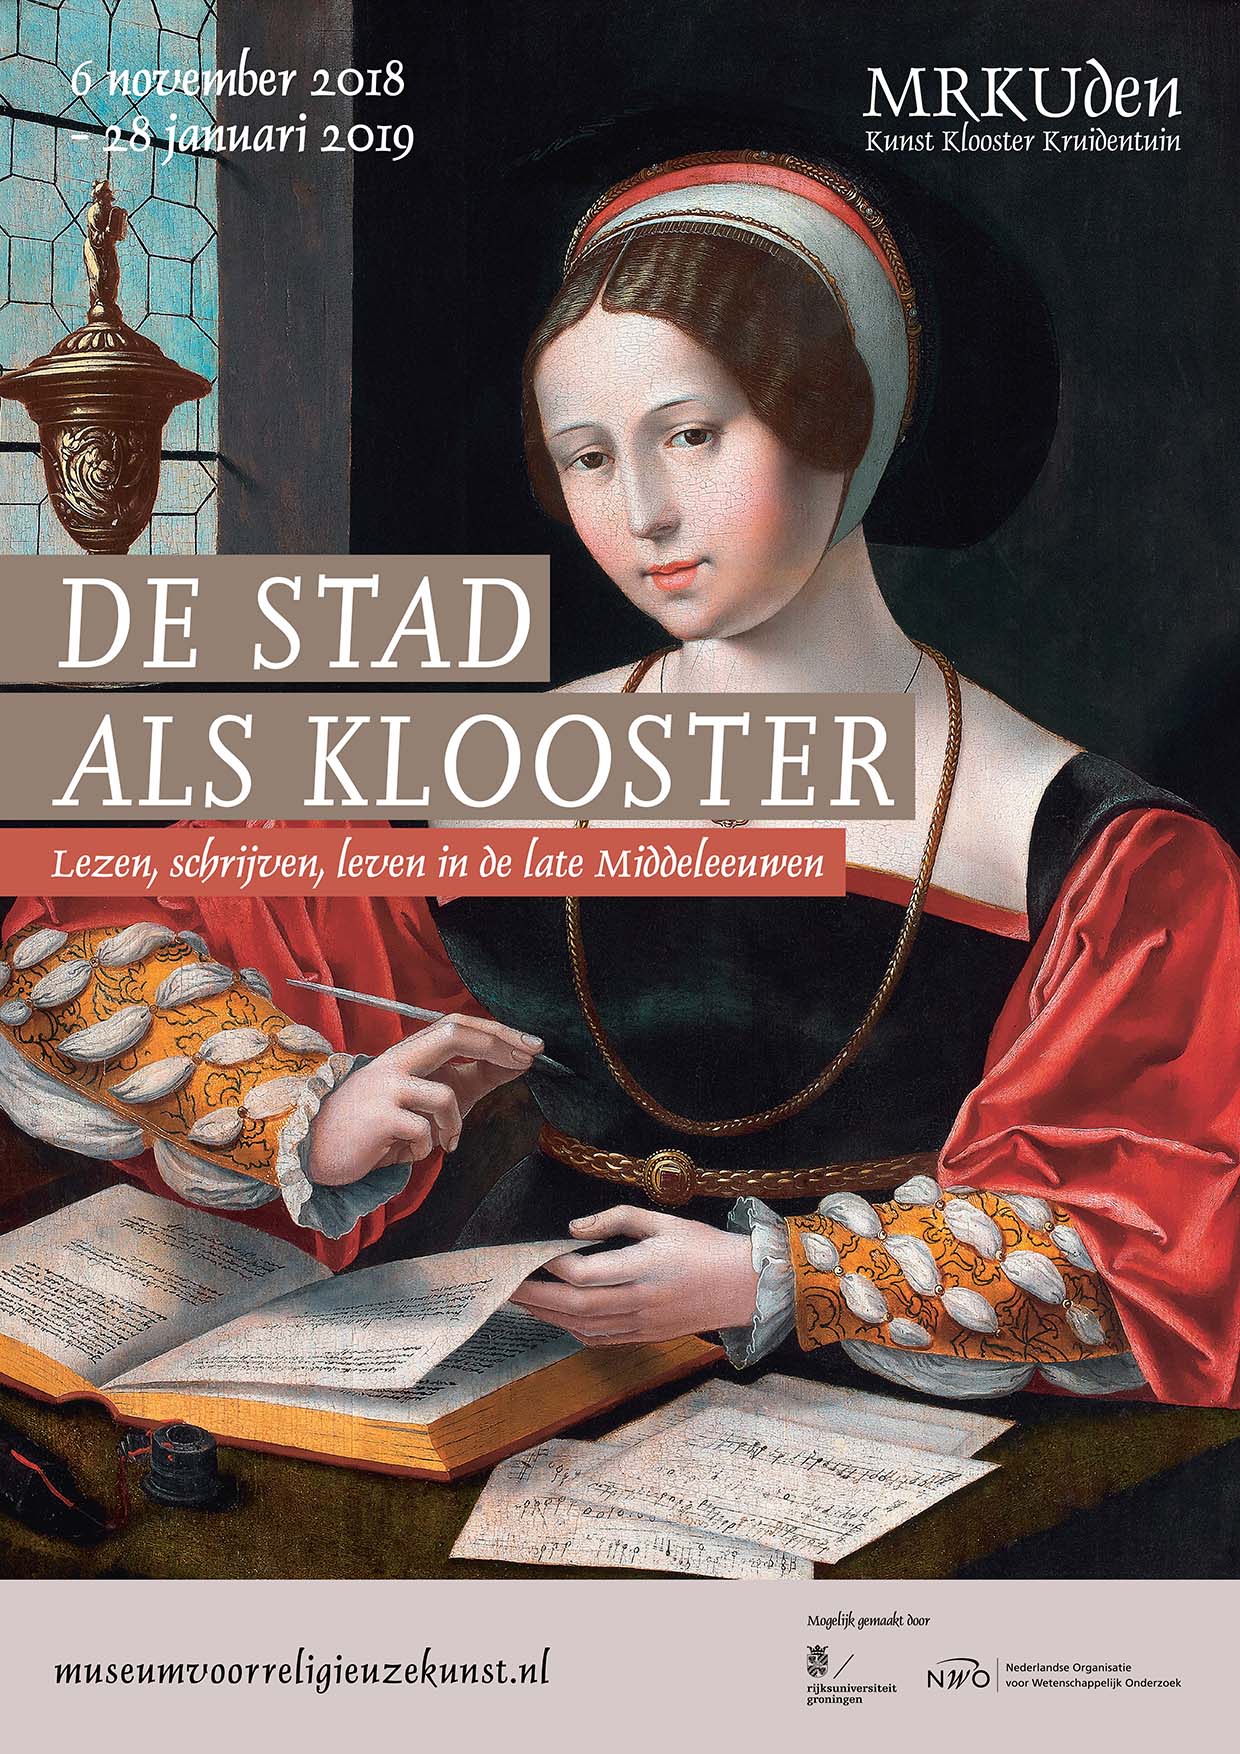 De Stad als Klooster (The City as a Monastery)